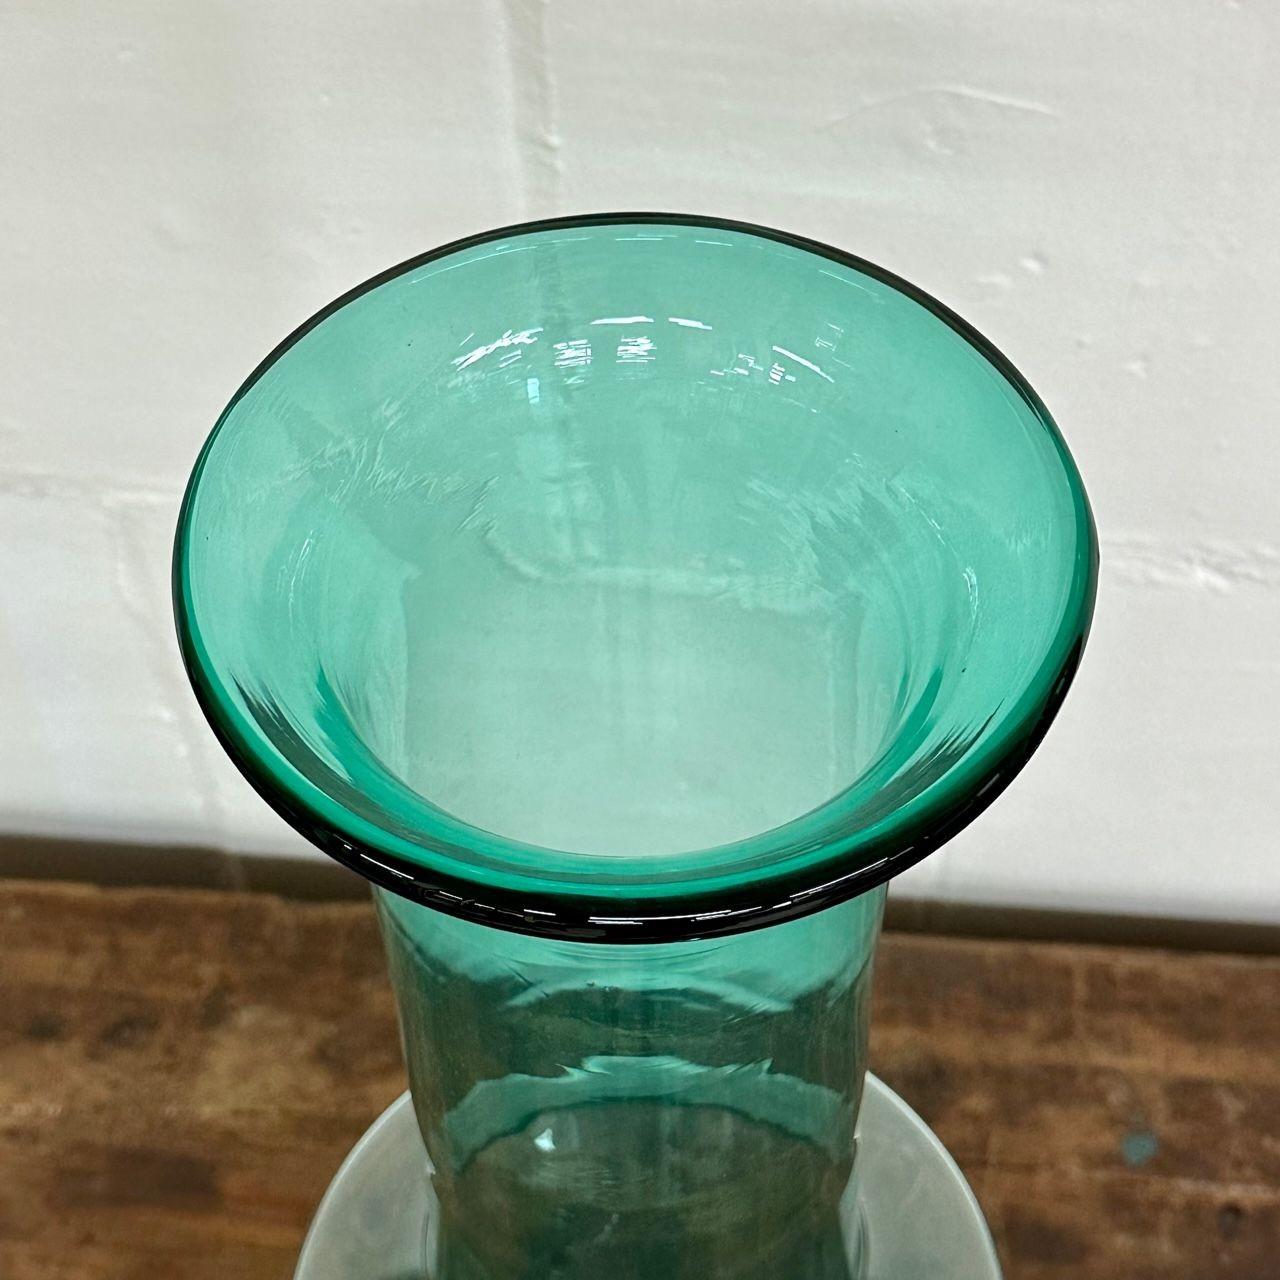 Large midcentury hand blown glass turquoise long floor or table vase by Blenko
 
Teal floor or table vase deigned by Wayne Husted for Blenko.
 
Blown Glass
United States, 1960s
 
Opening is 6.25